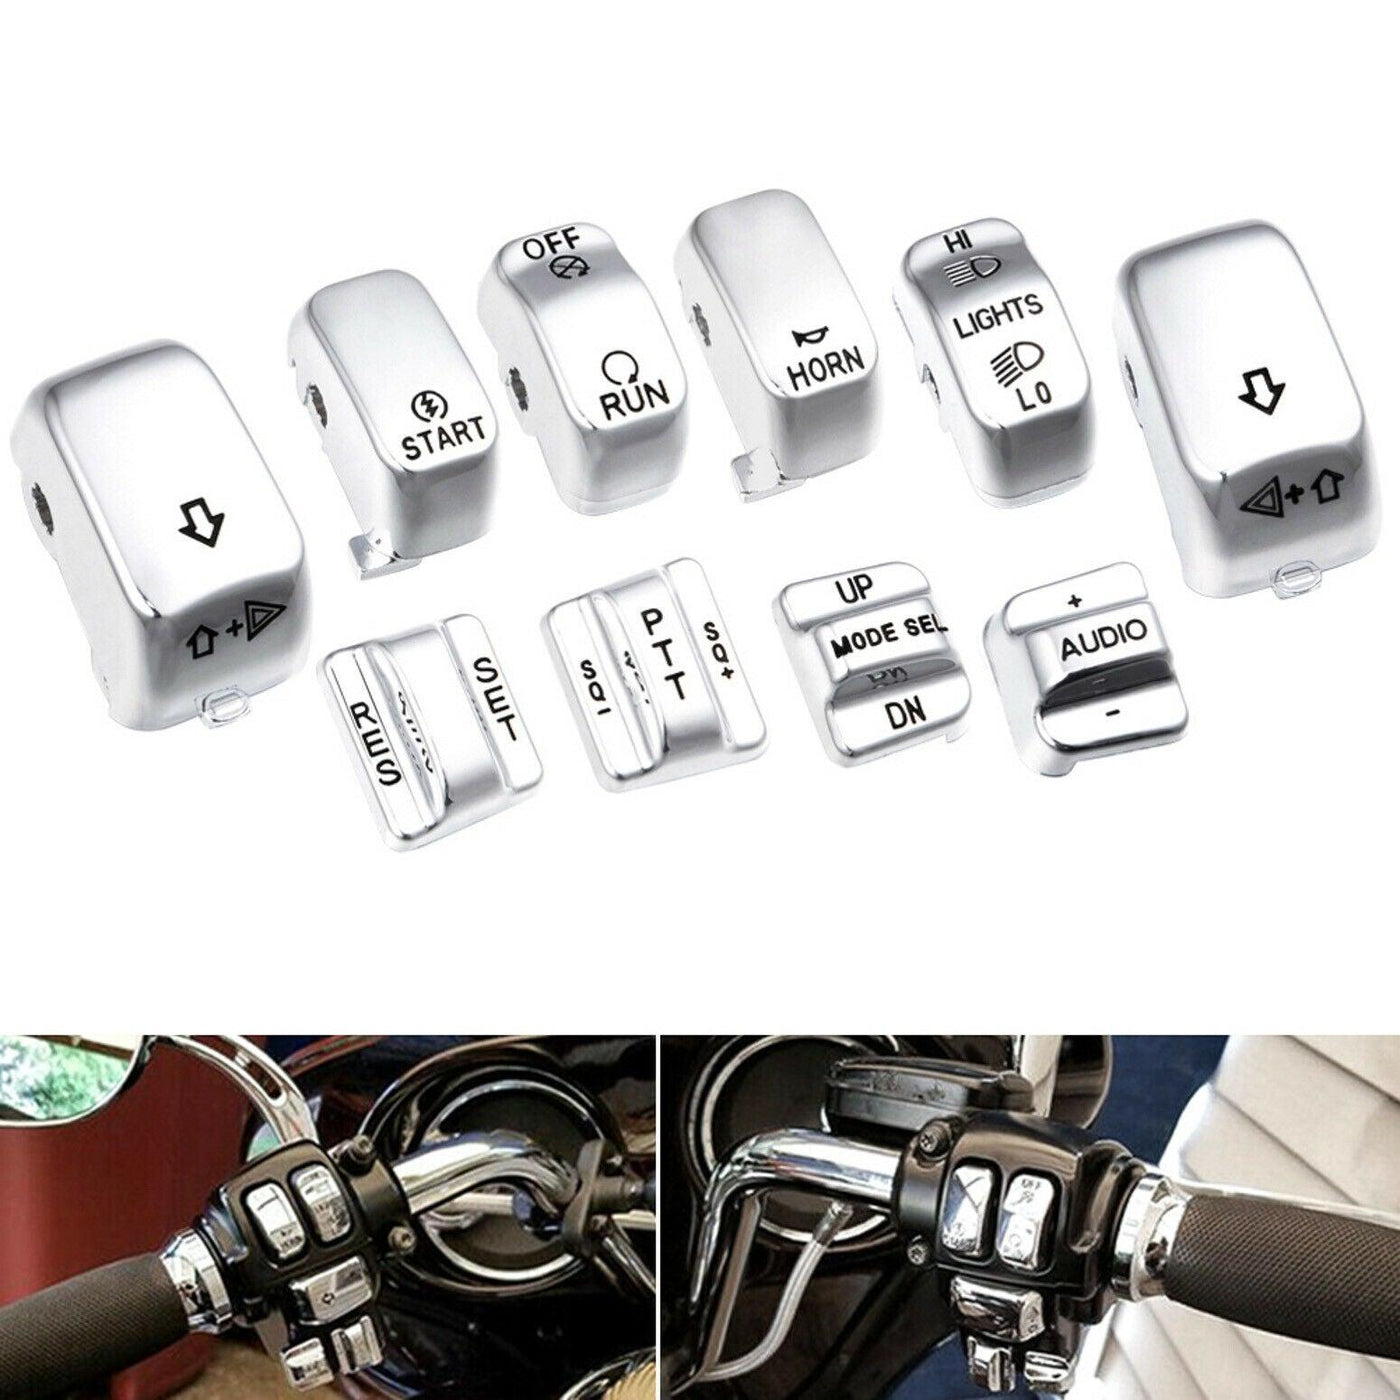 10pcs Chrome Replacement Housing Switch Cap Button Fit for Harley Touring 96-13 - Moto Life Products